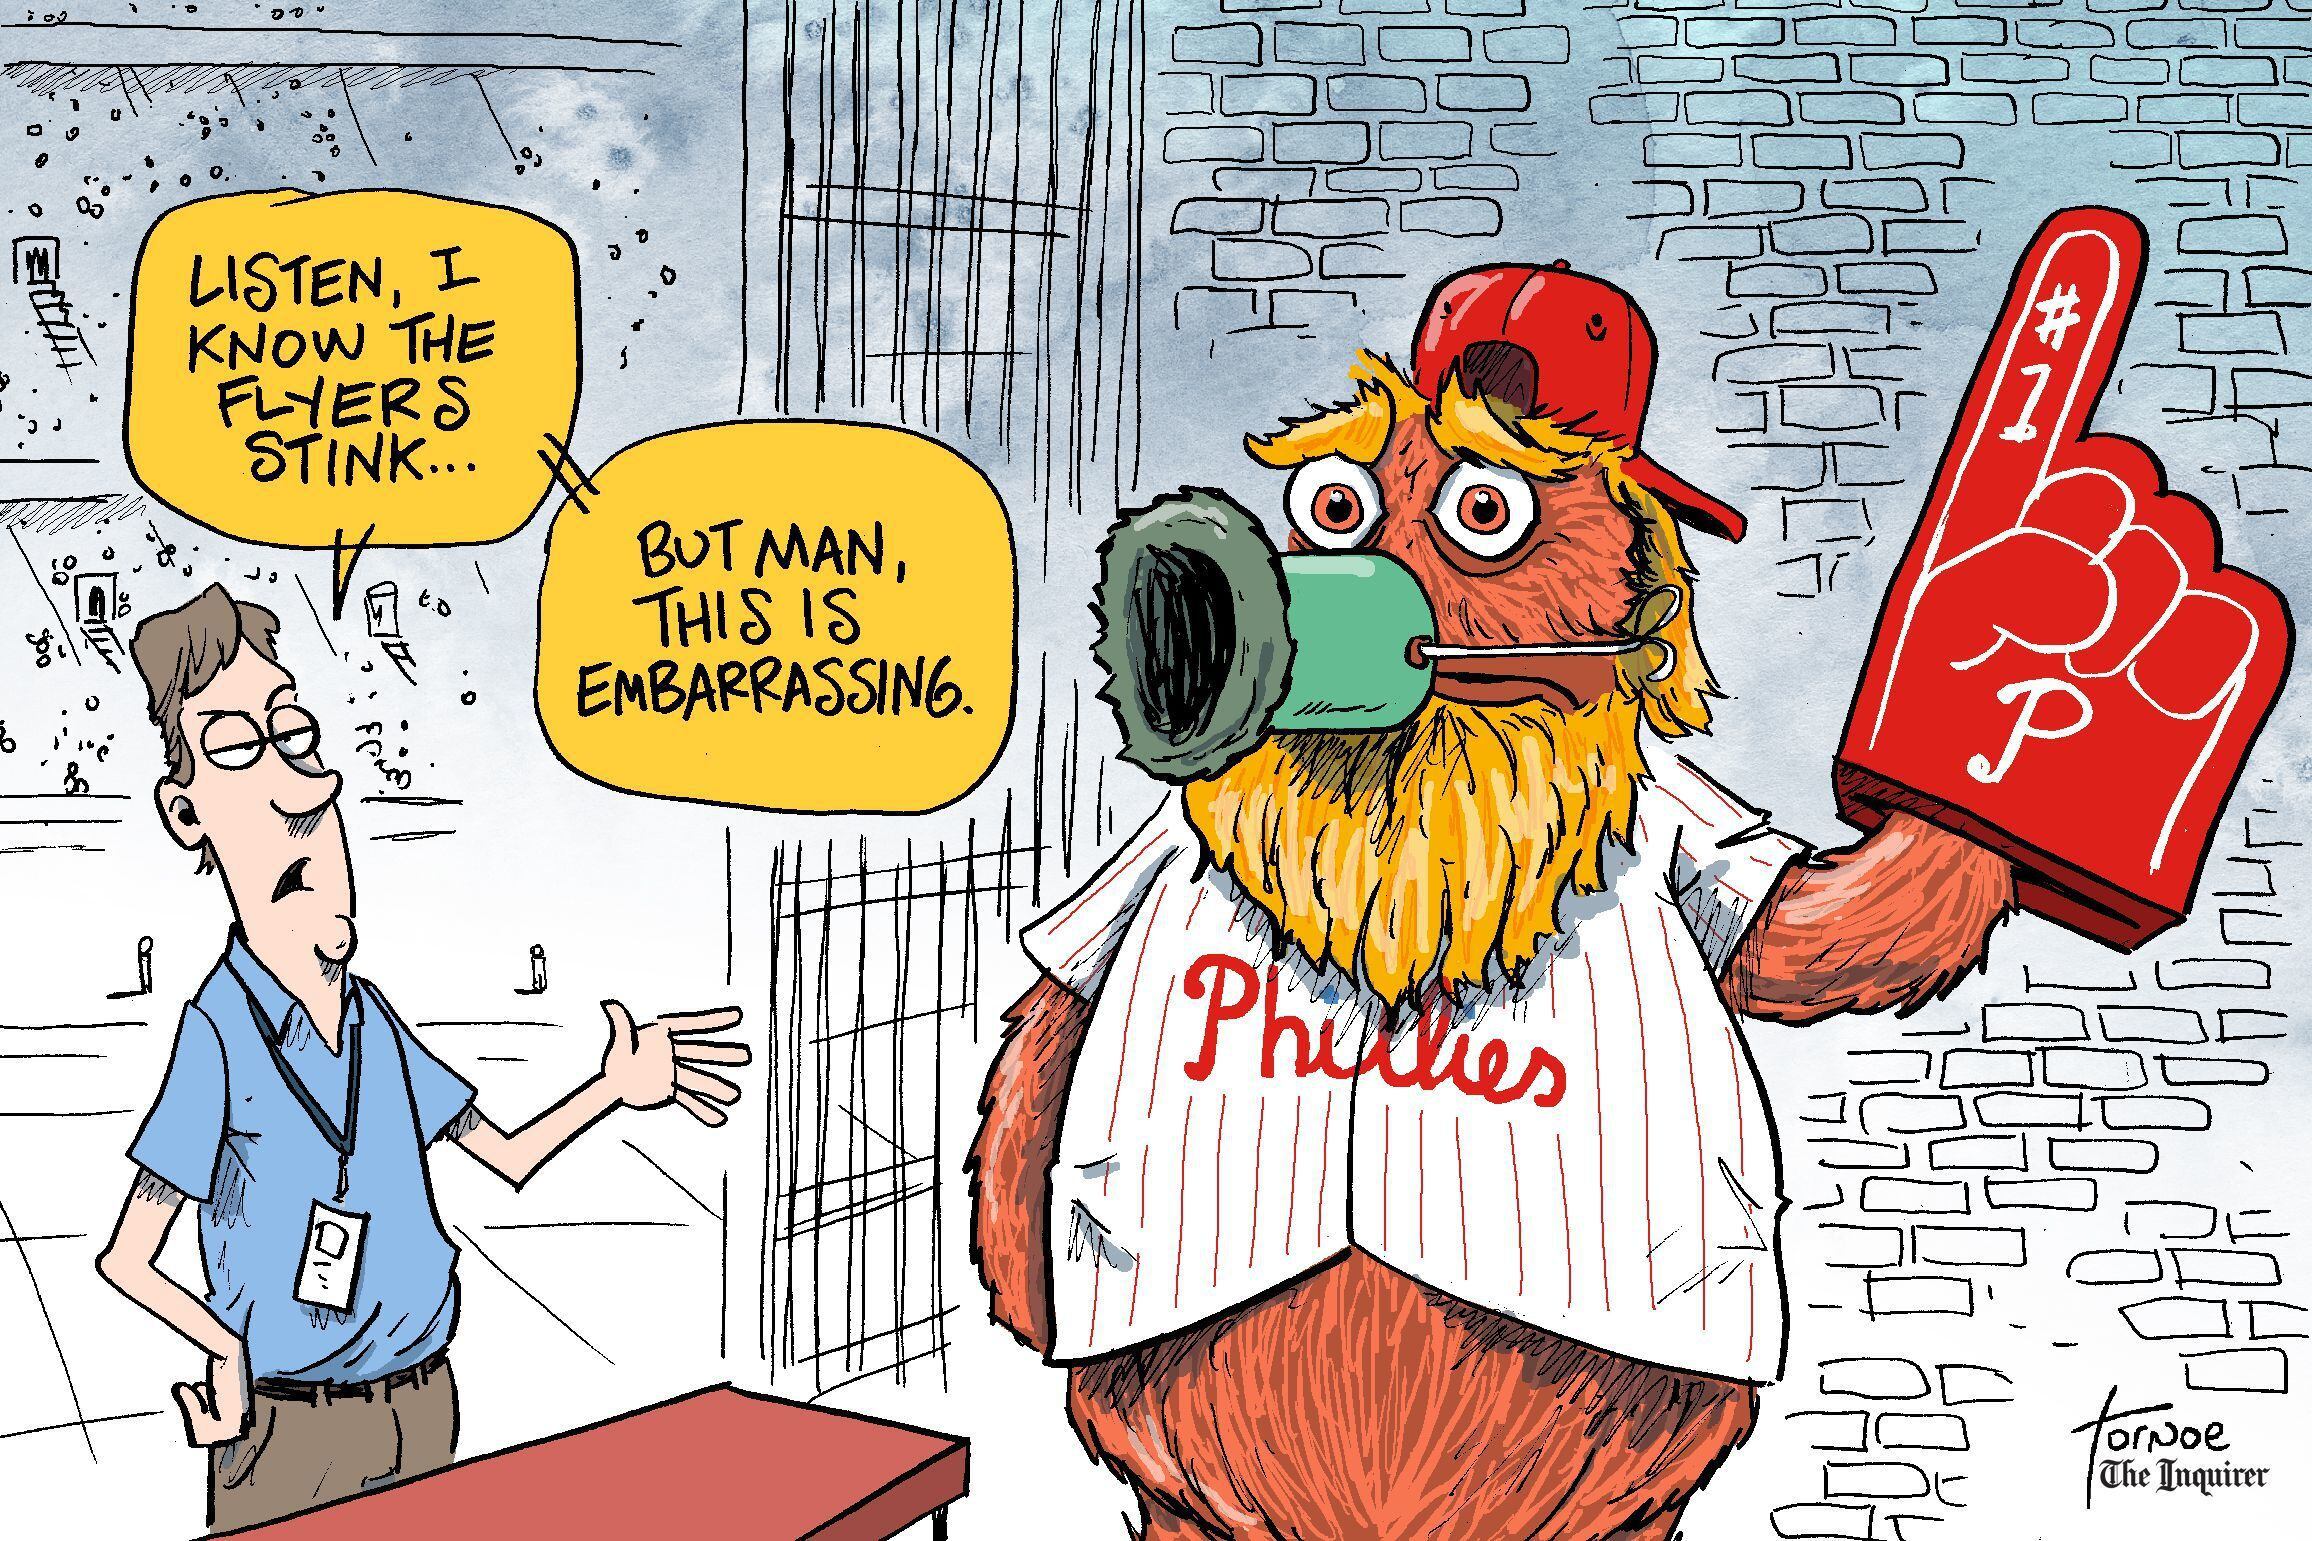 Flyers mascot Gritty joins forces with Phillie Phanatic